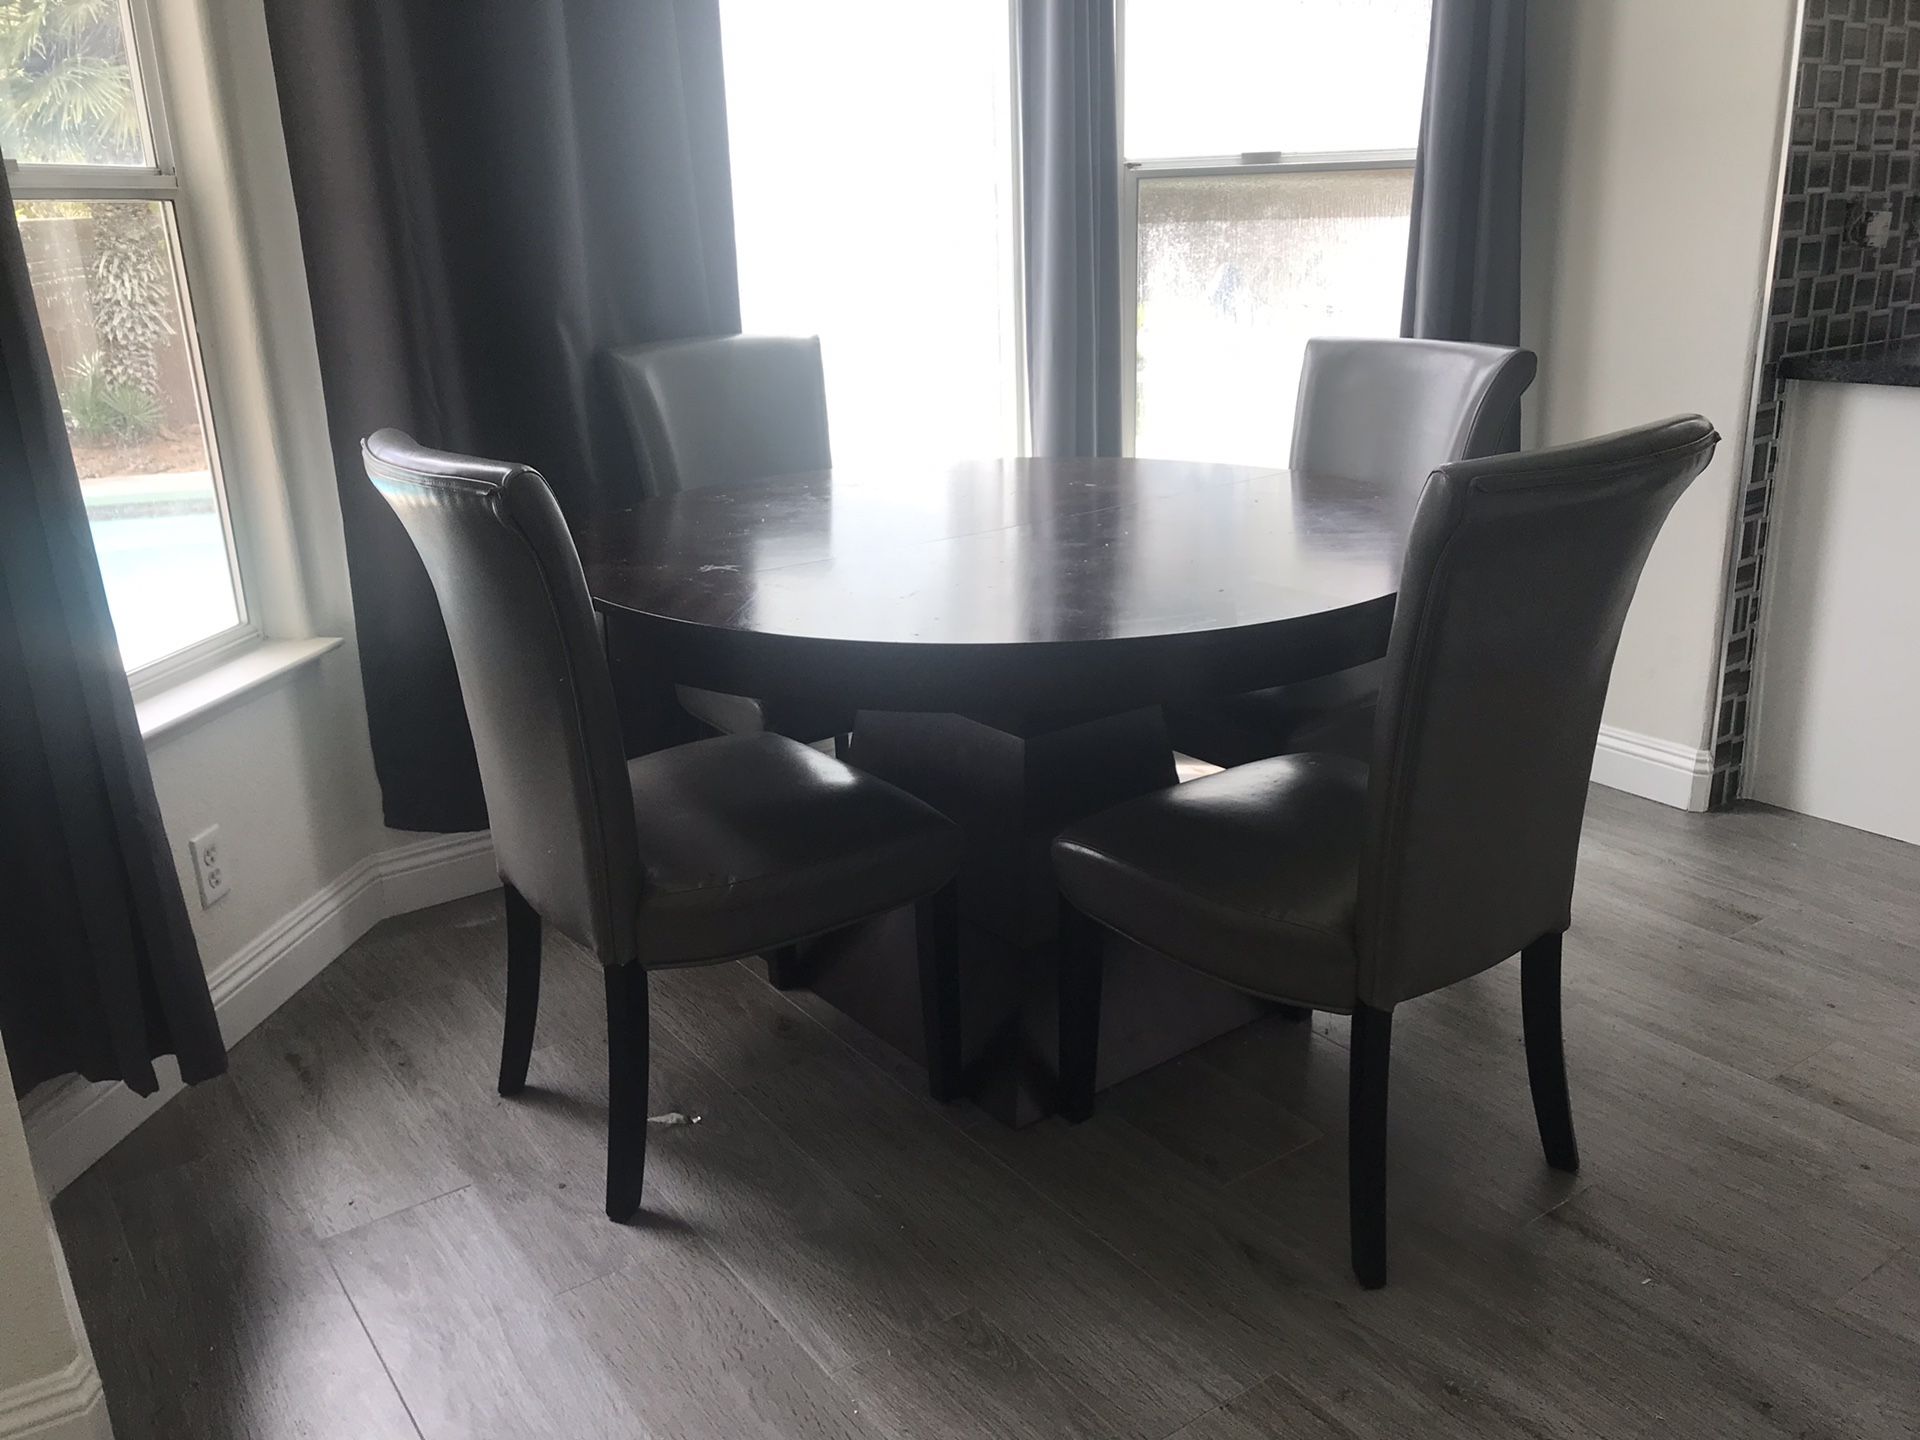 Breakfast dining table with 4 chairs